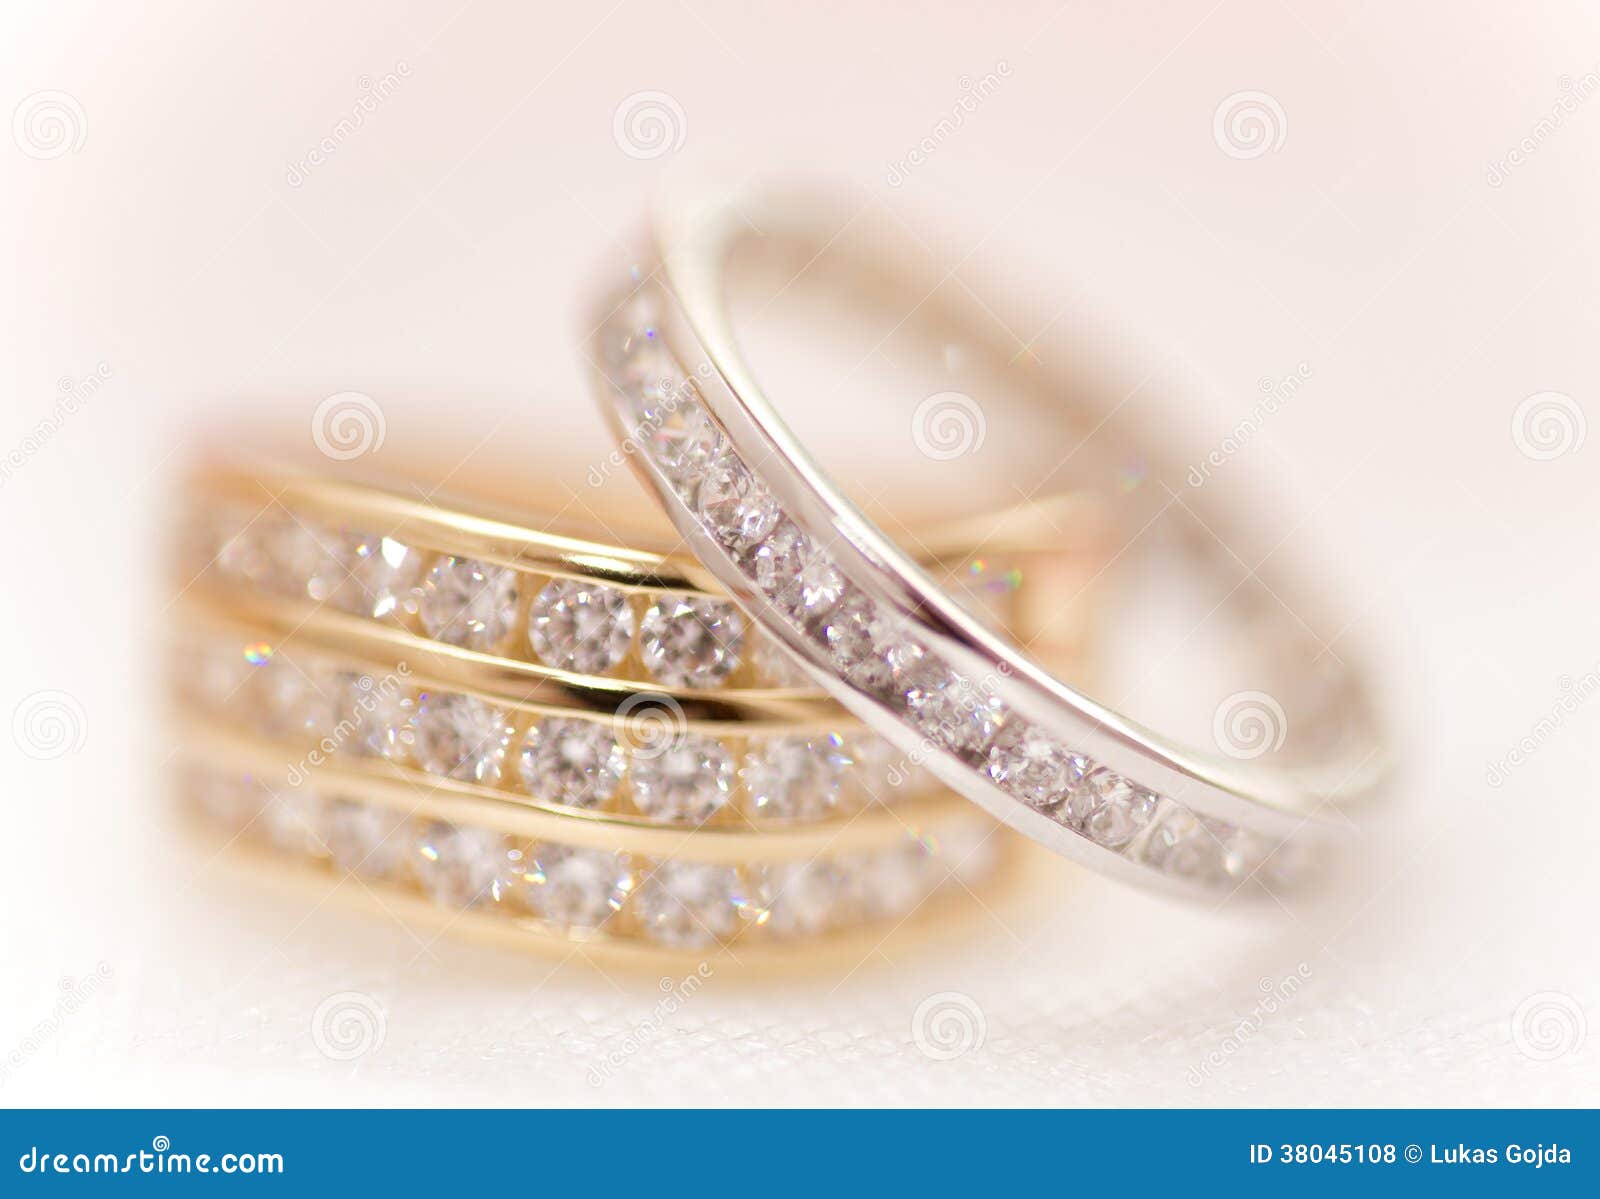 Royalty Free Stock Photos: Gold and silver wedding rings